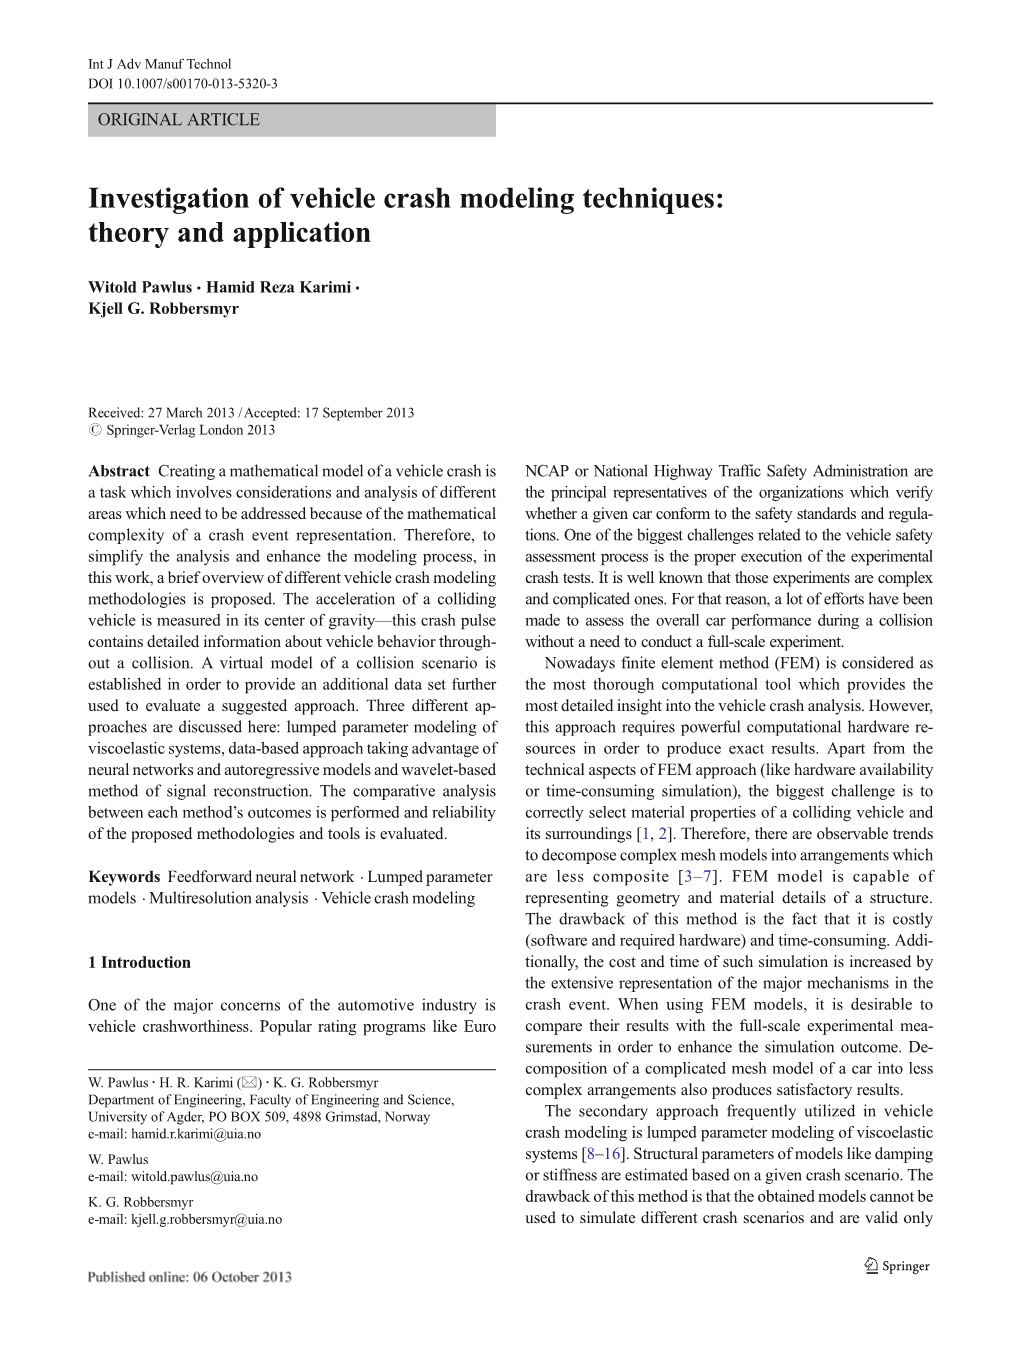 Investigation of Vehicle Crash Modeling Techniques: Theory and Application